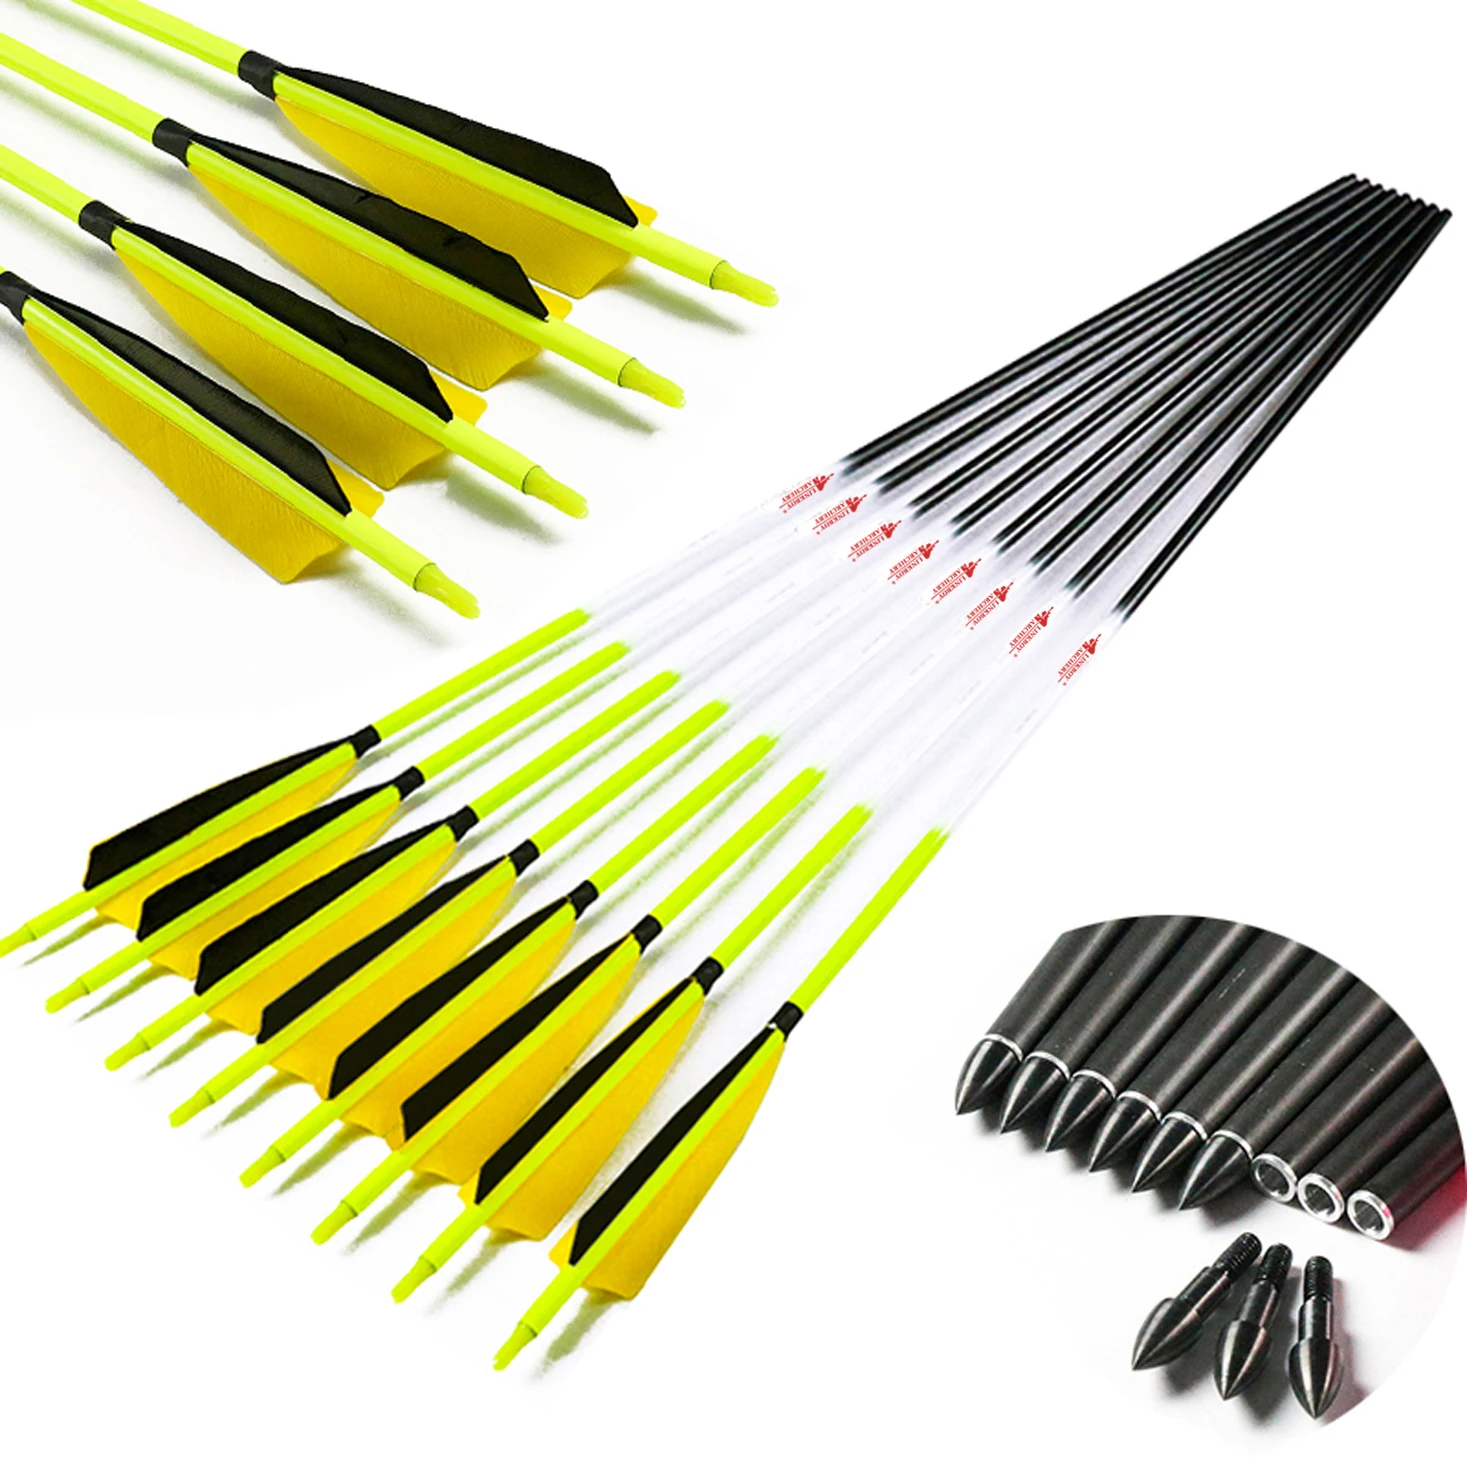 SP300-600 Archery Carbon Arrows Shaft Turkey Vanes Points Bow Hunting Shooting 